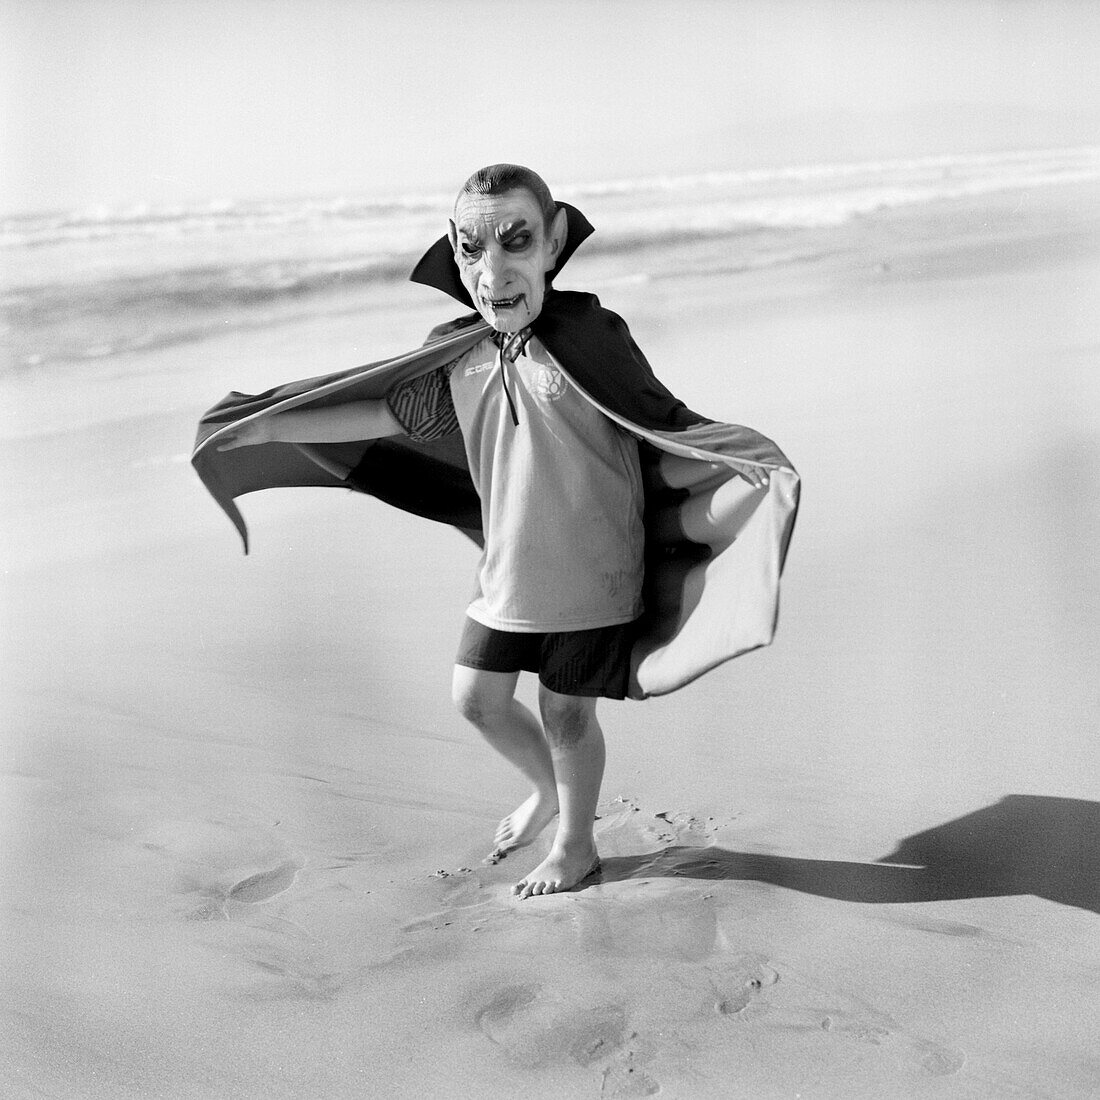 Boy Wearing Scary Dracula Mask and Cape on Beach